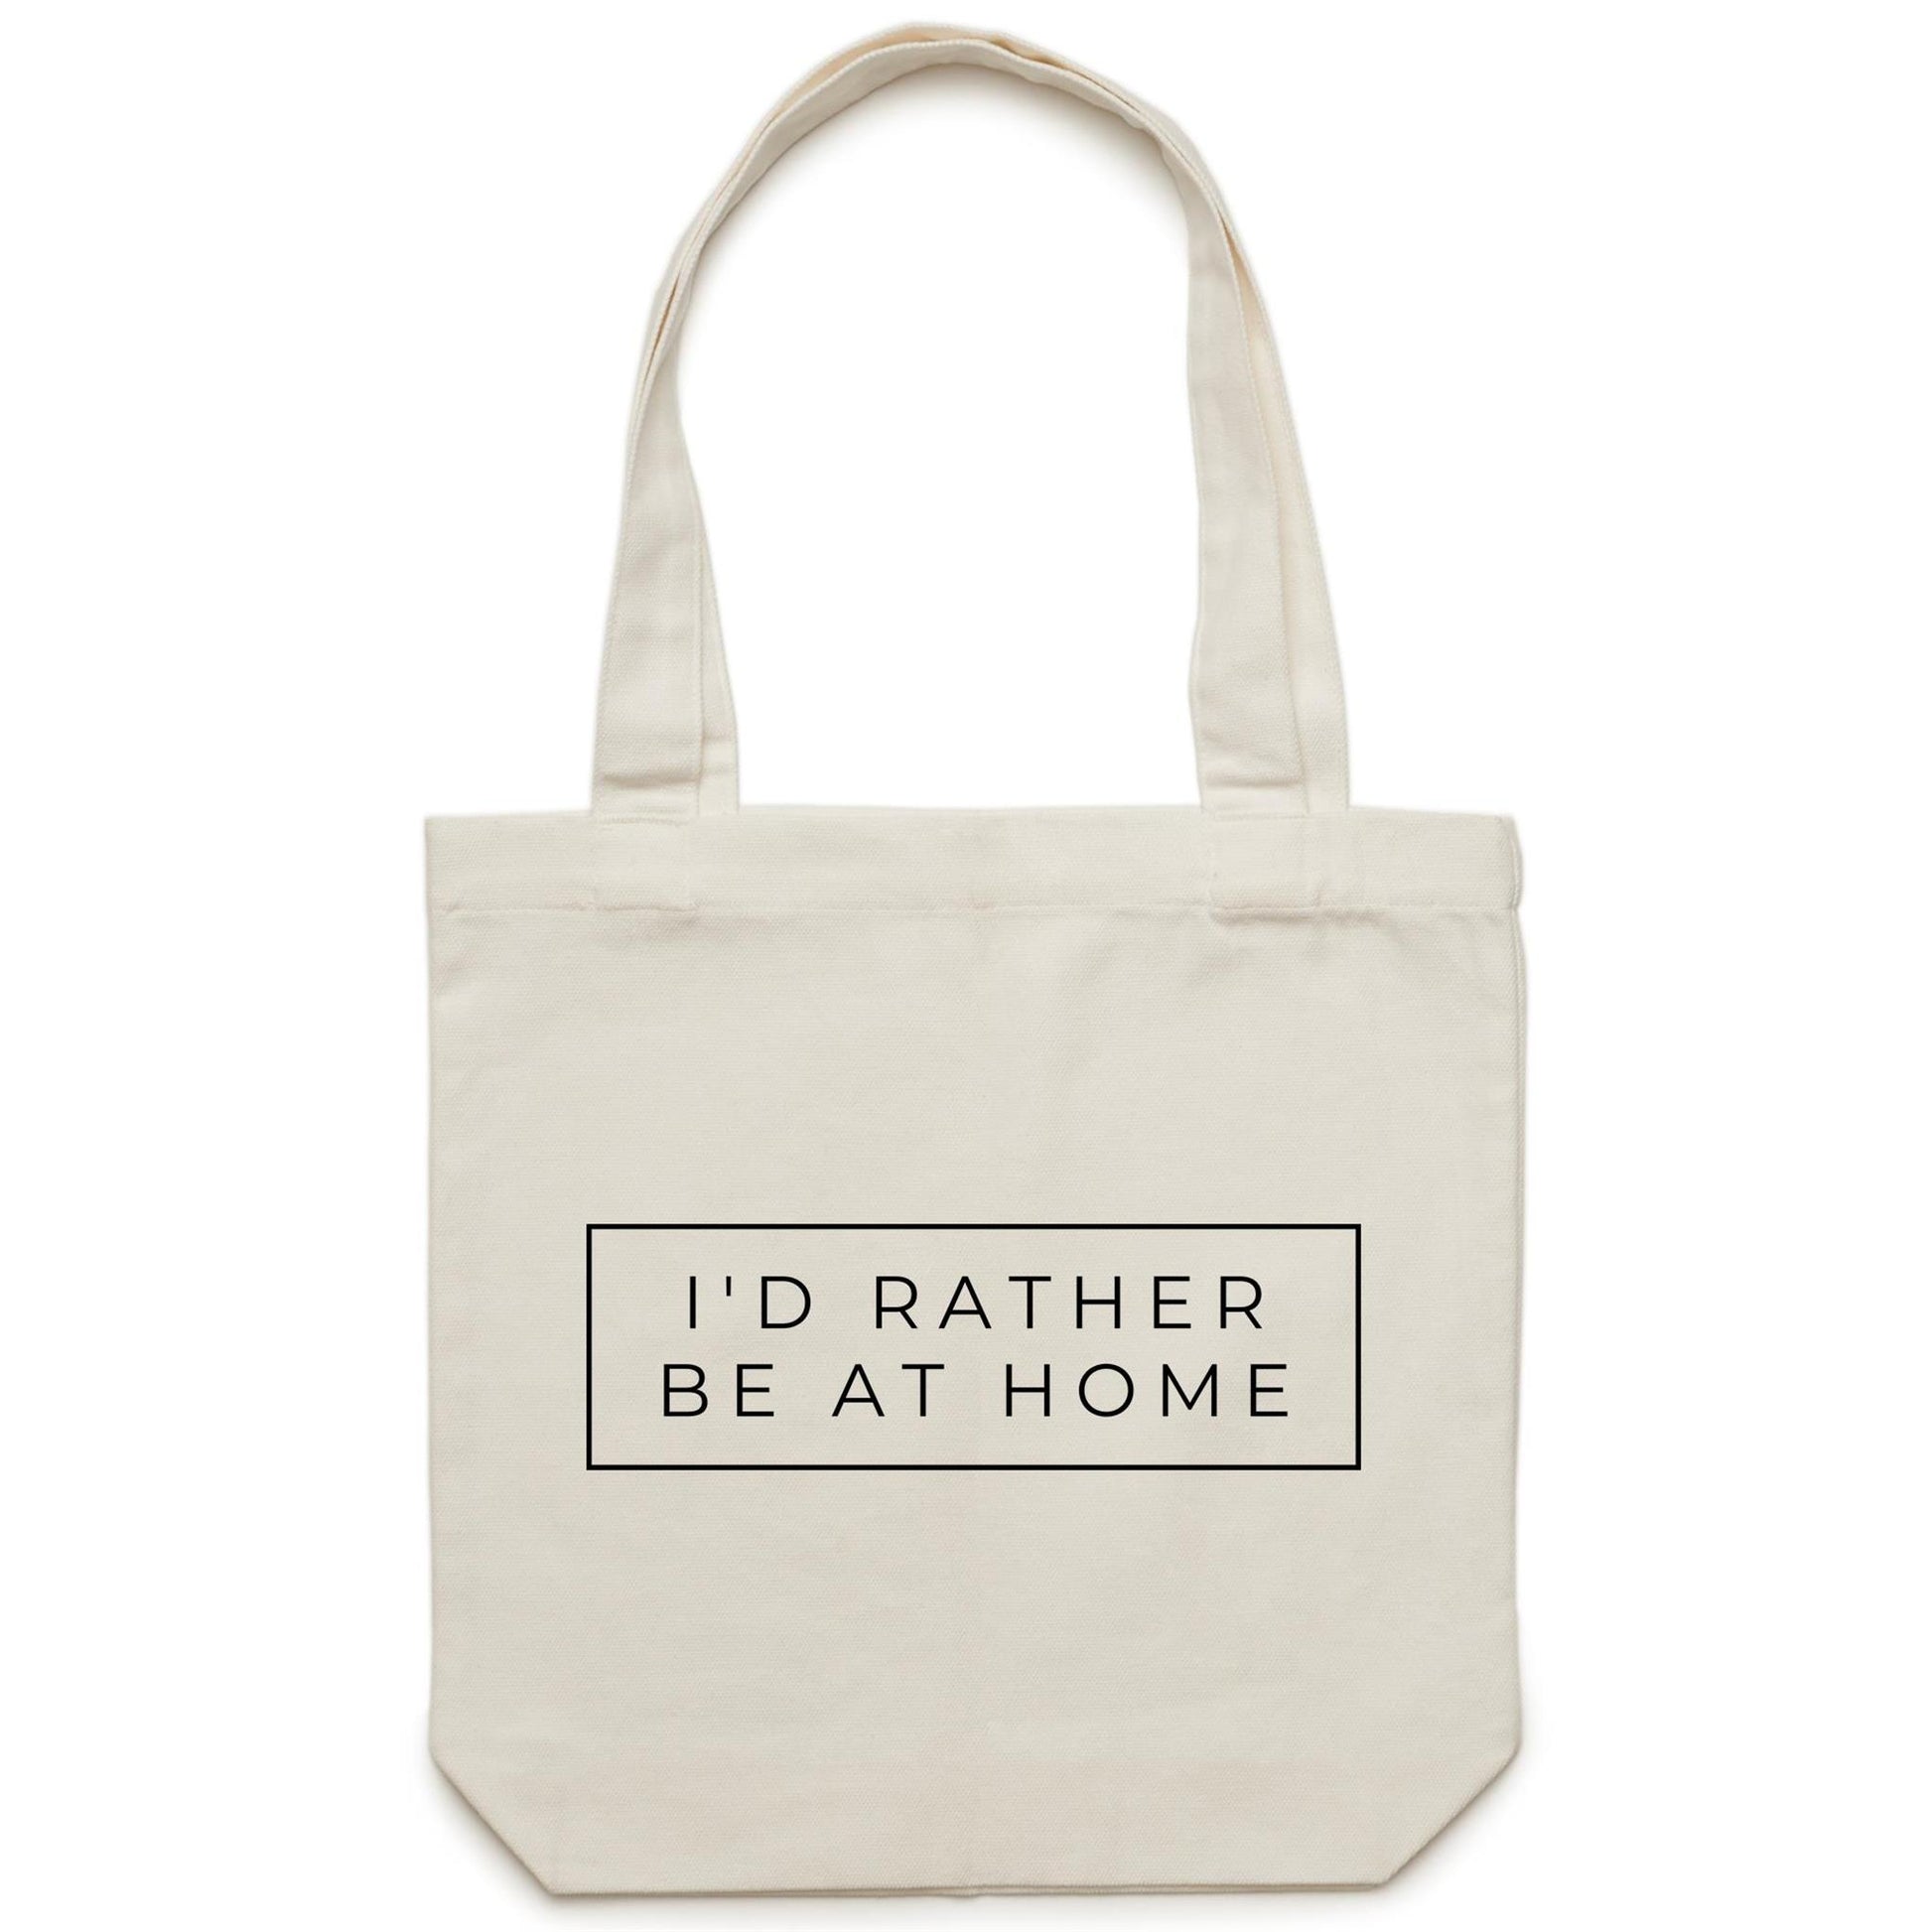 I'd Rather Be At Home - Canvas Tote Bag Default Title Tote Bag home